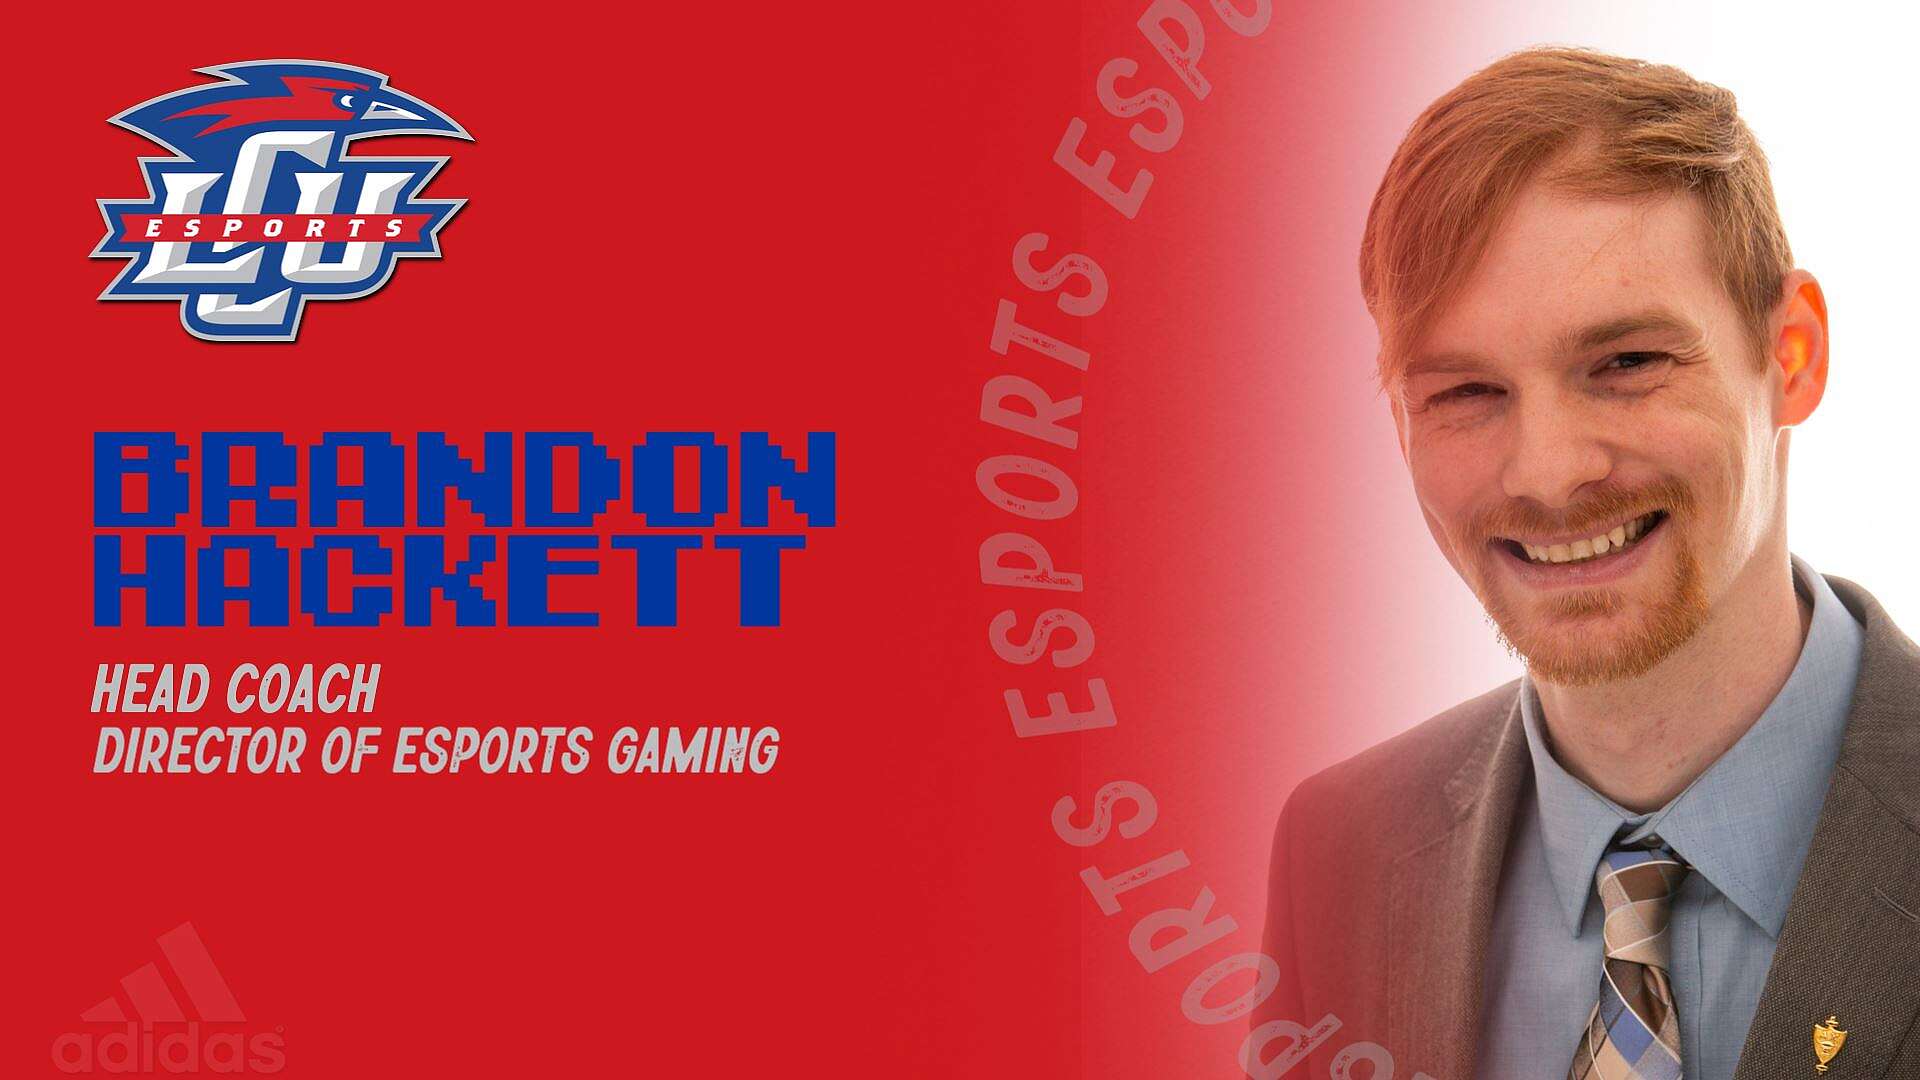 Graphic shows headshot of Brandon Hackett, listing him as the new Head Coach and Director of Esports Gaming